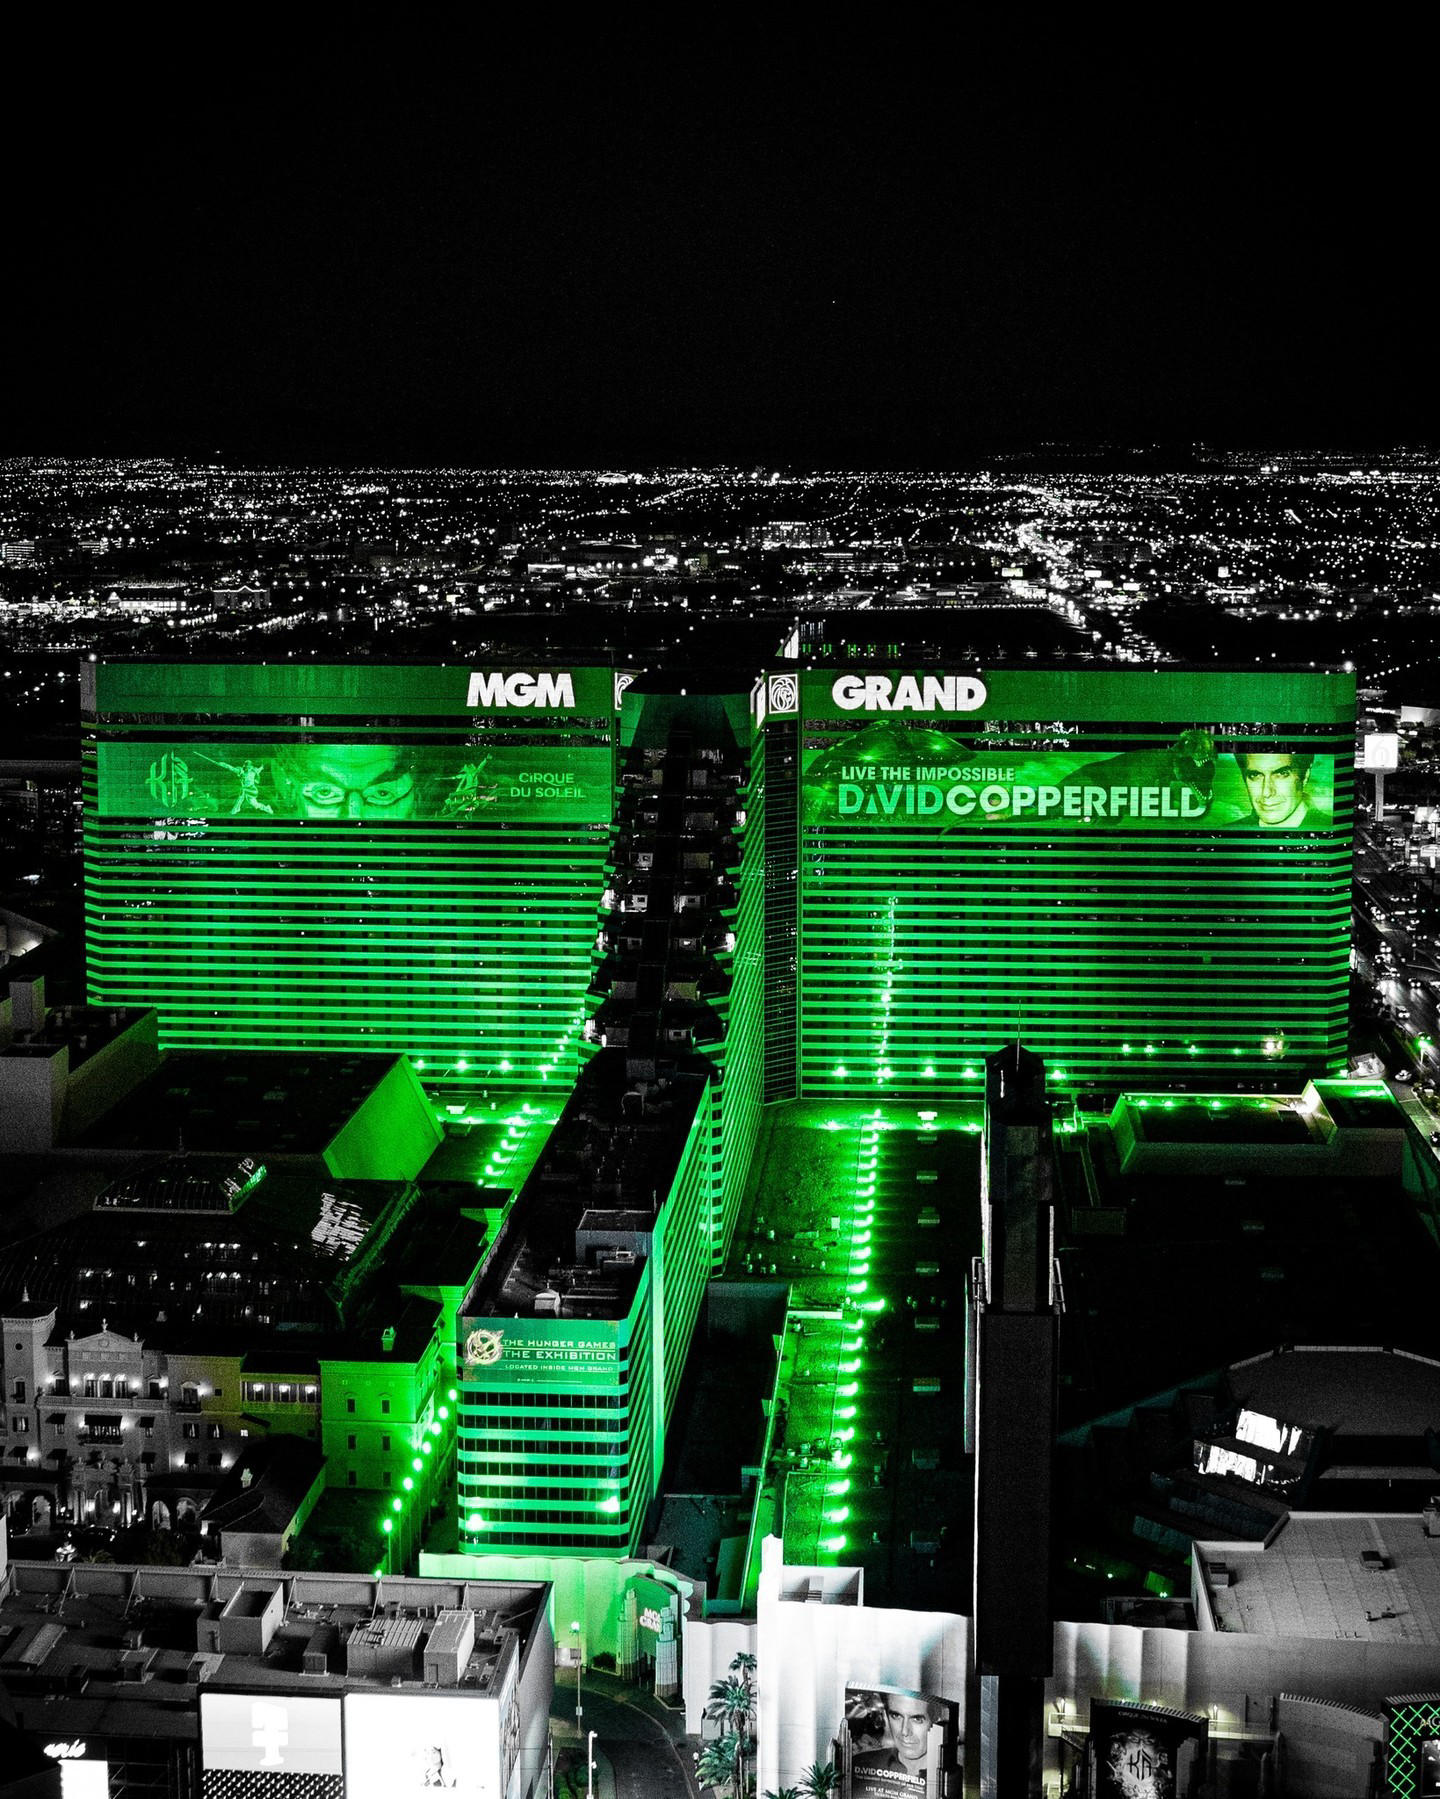 MGM Grand Hotel & Casino - Your Friday night is looking mighty bright